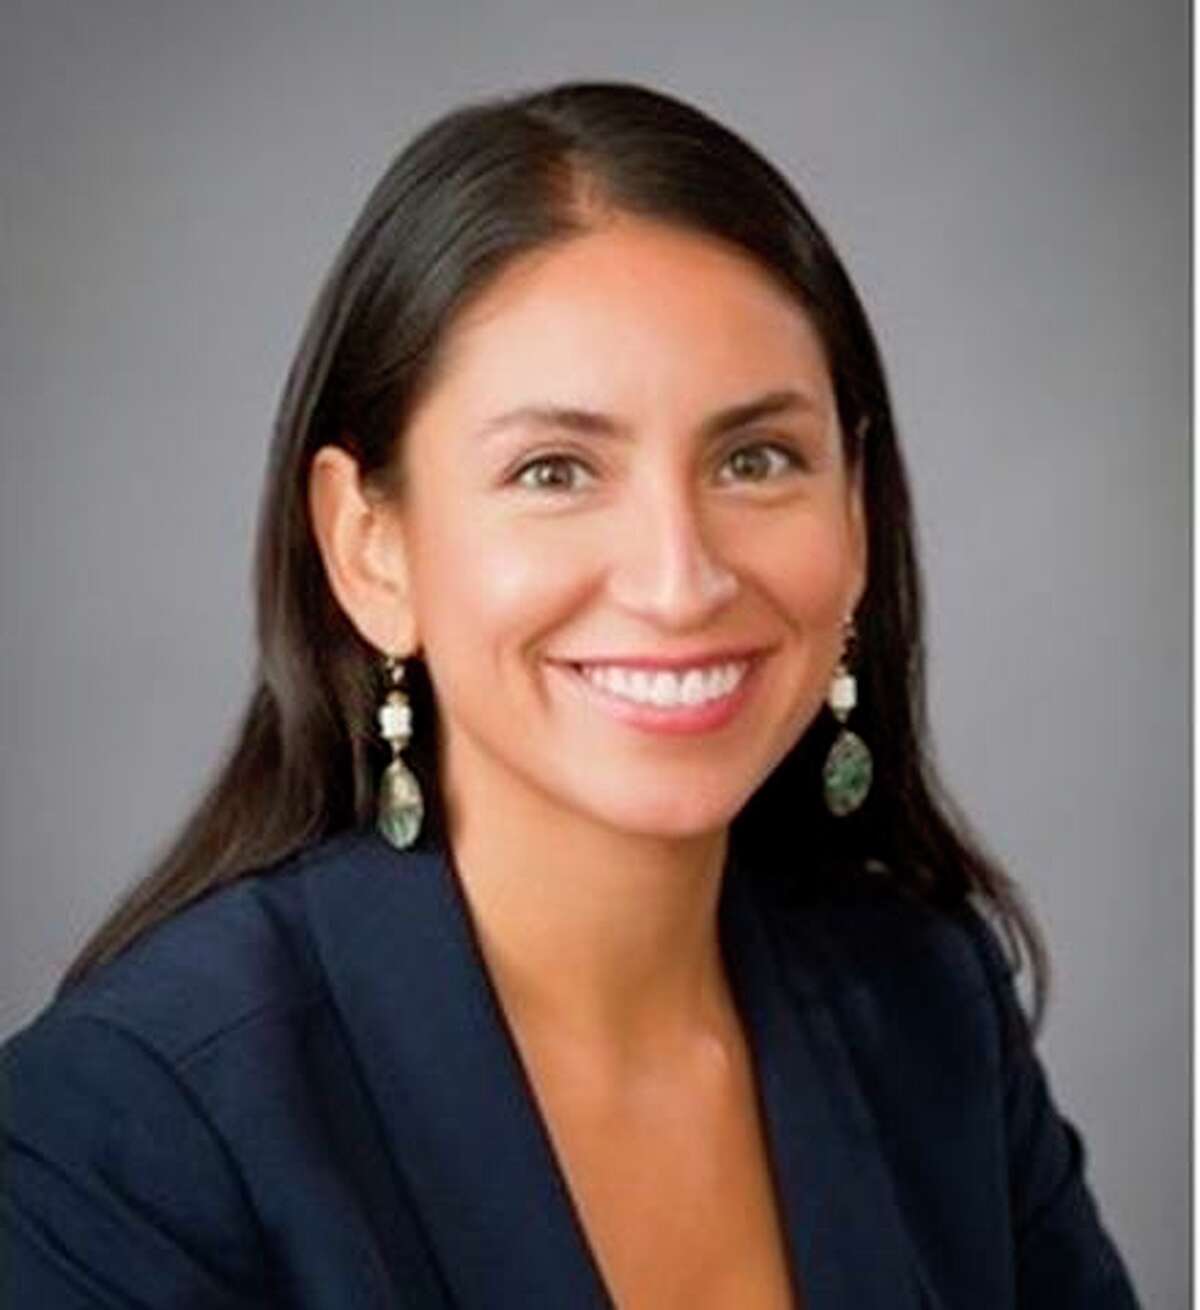 Yana Garcia, who lives in Oakland and serves as an environmental legal and policy adviser for the Attorney General’s Office, will be the first Latina to serve as California's secretary for environmental protection.